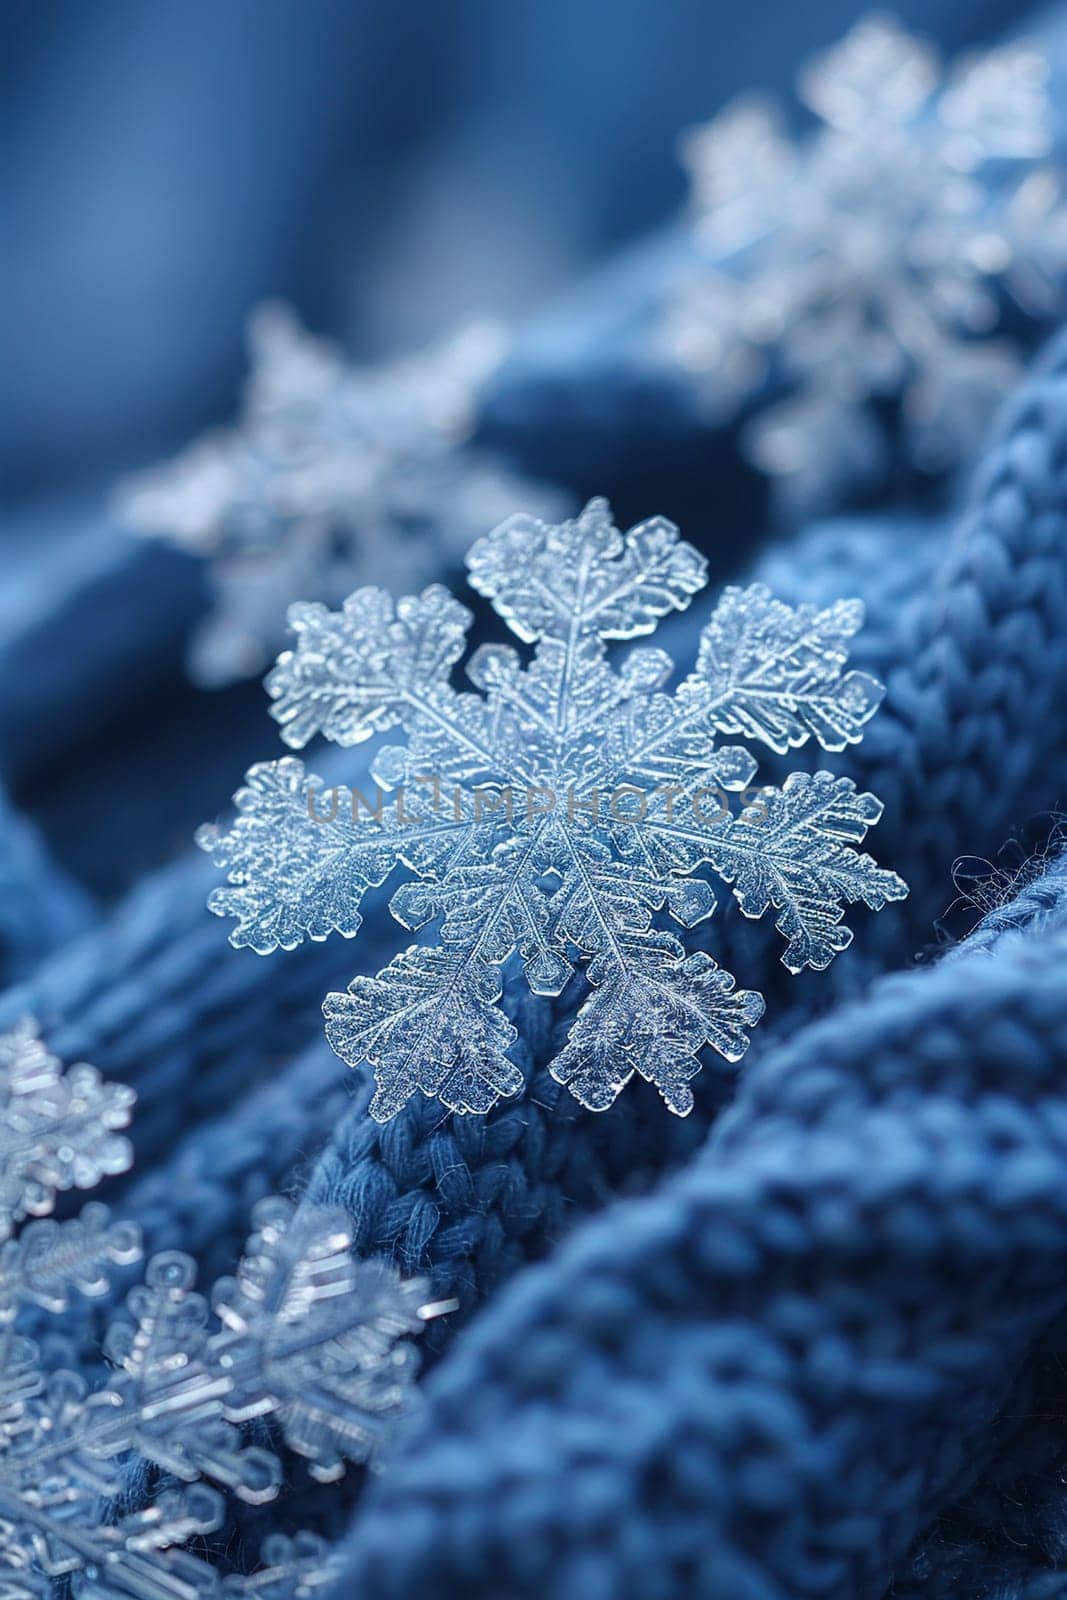 Macro shot of snowflakes on fabric, capturing the unique beauty of winter